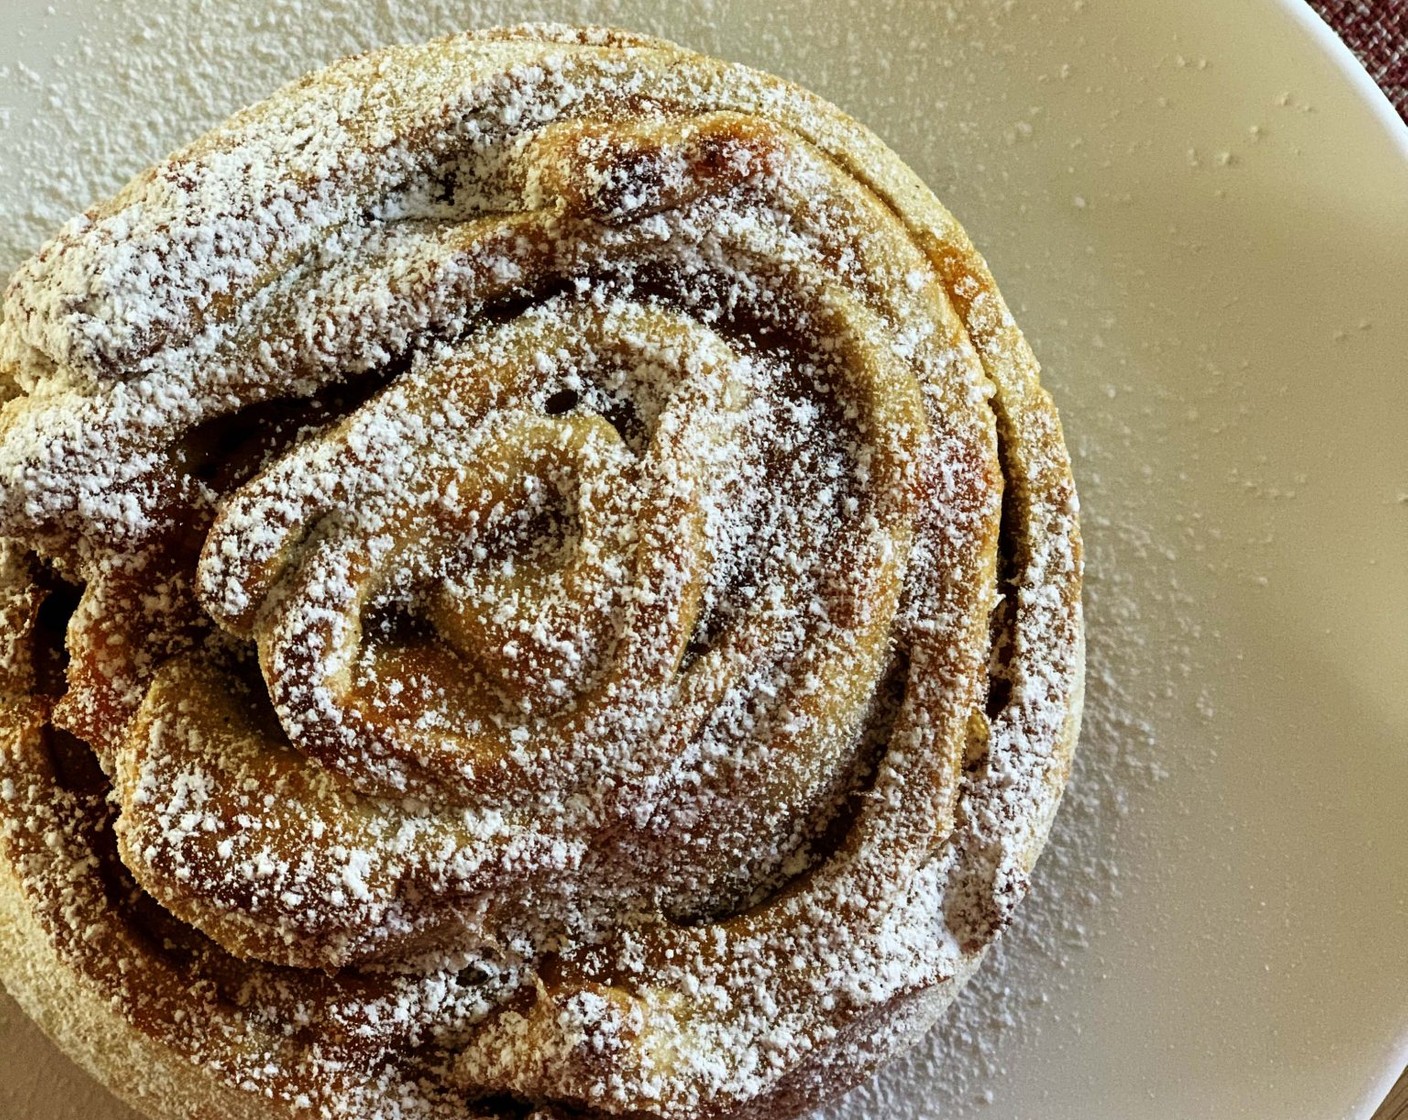 step 8 Let your “rose” cool down completely, then dust it with Powdered Confectioners Sugar (to taste) and serve!